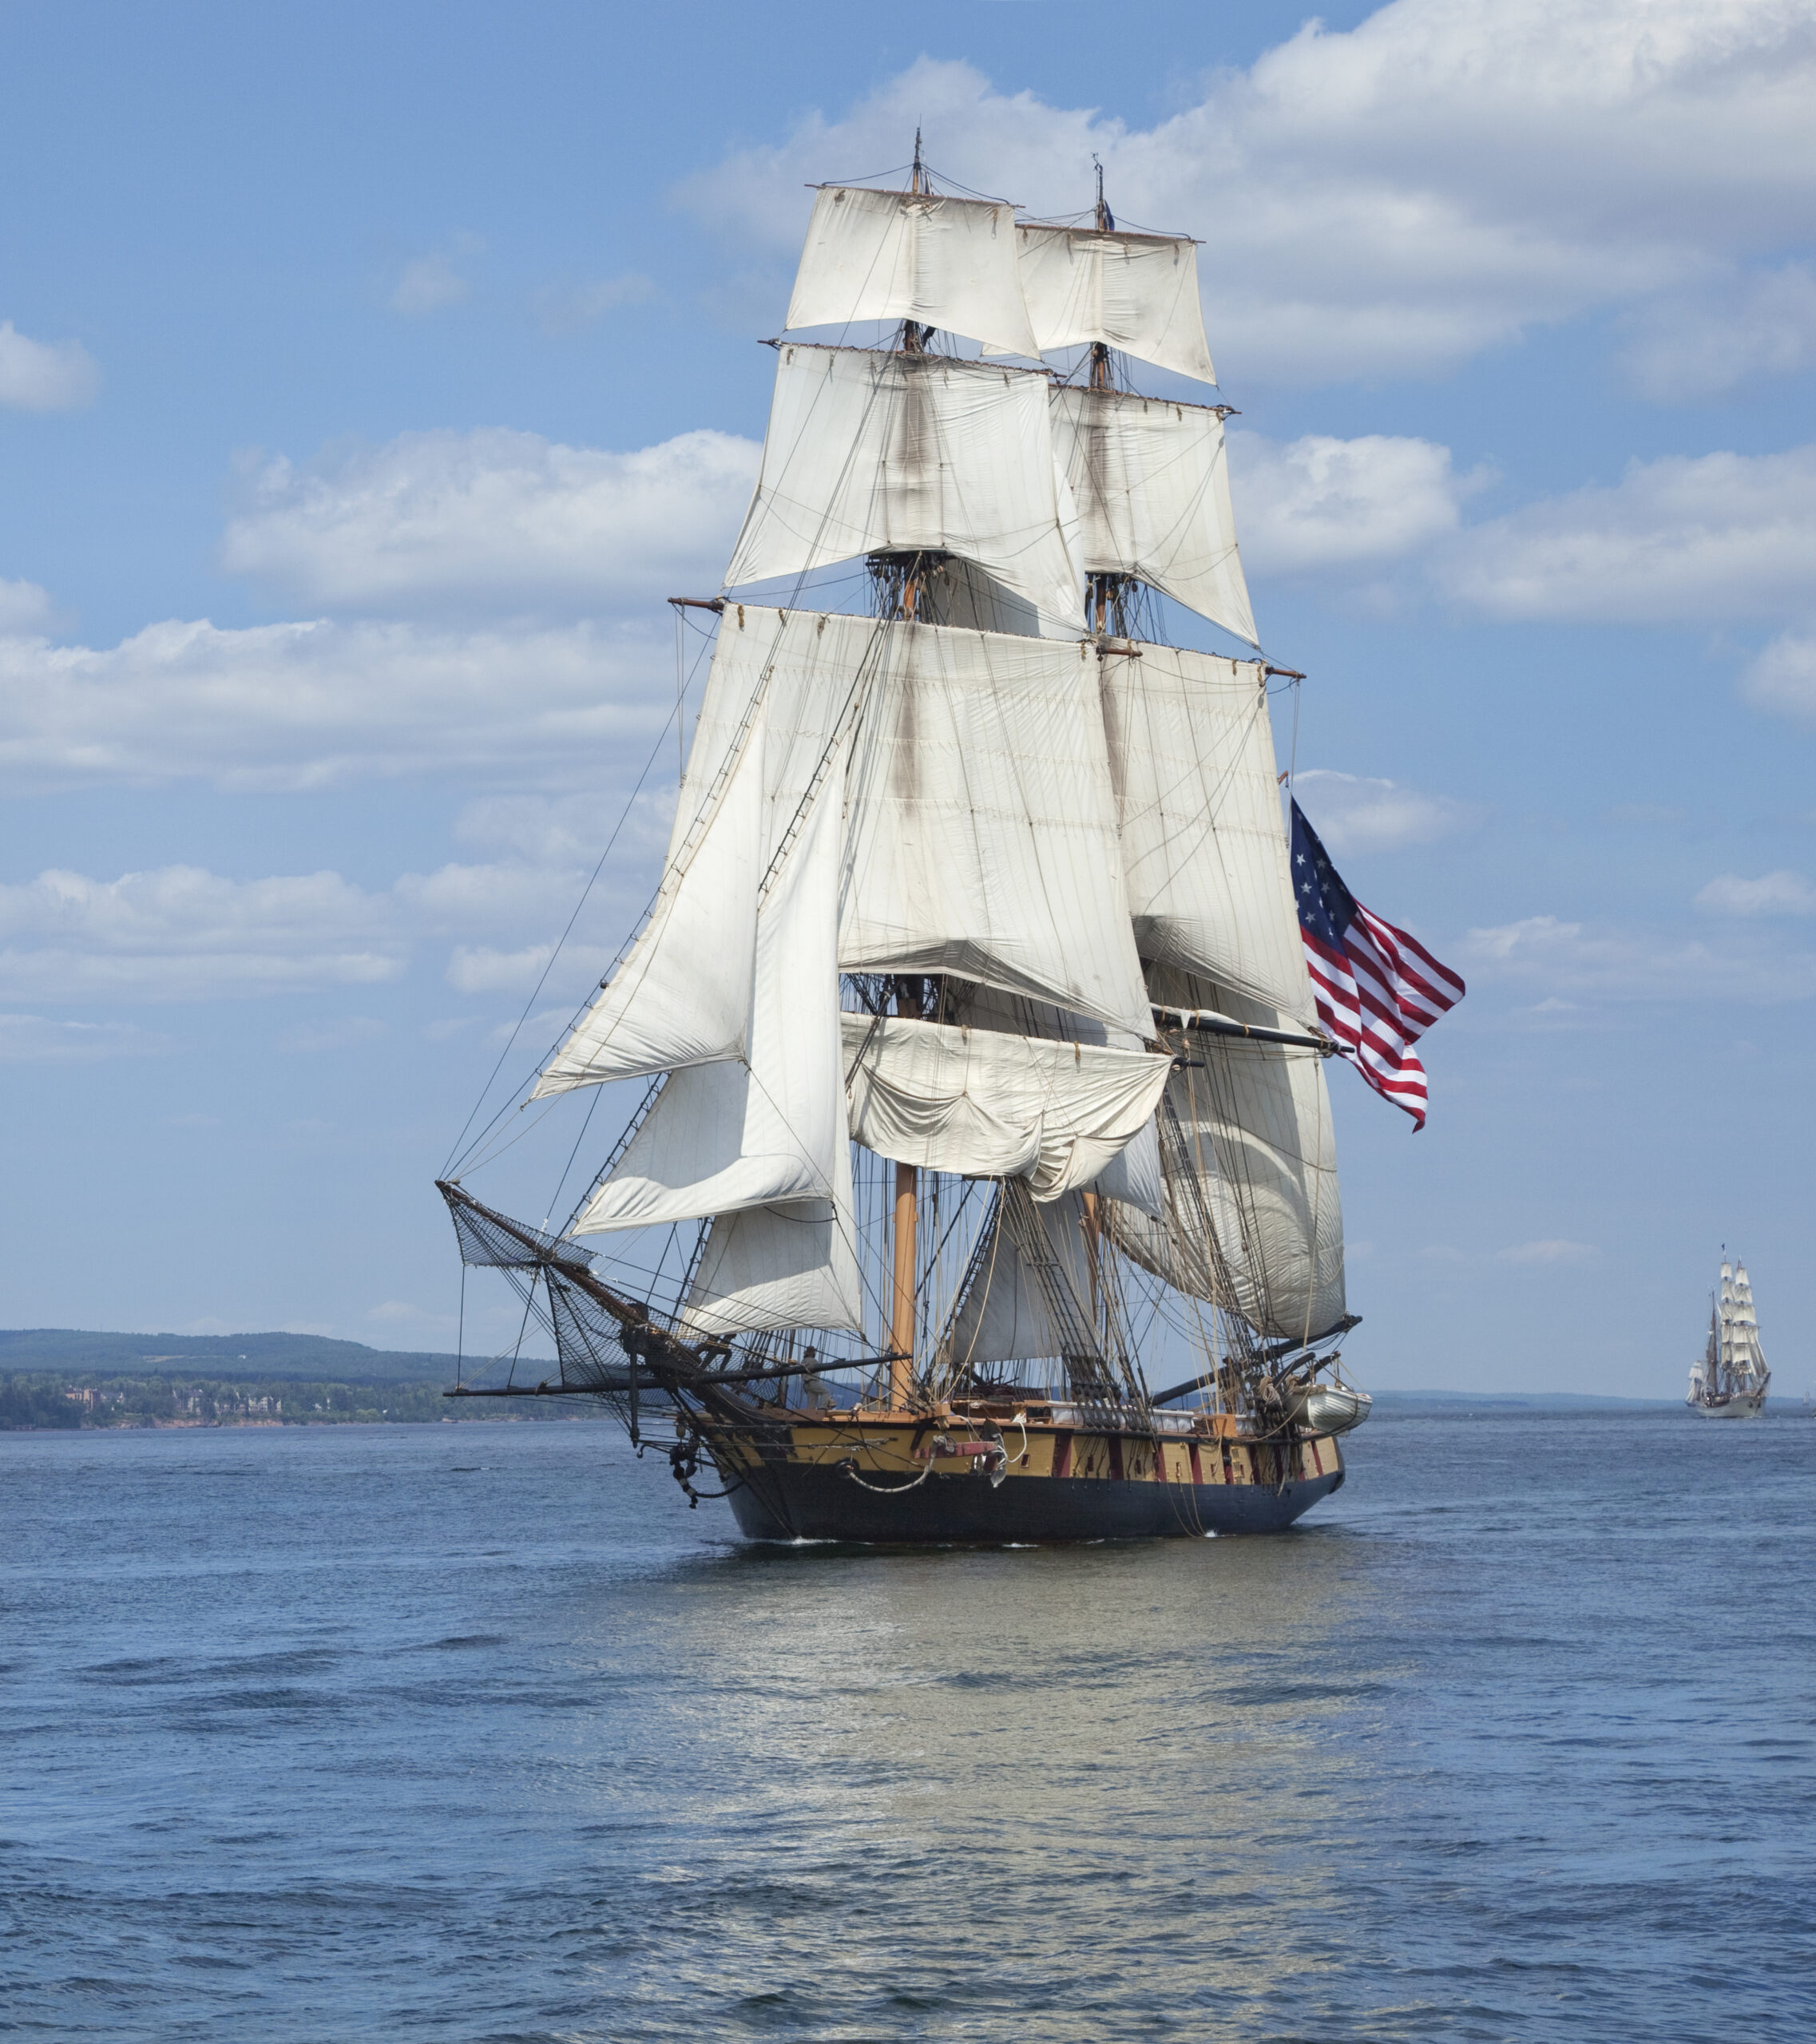 A tall ship sailing with the American flag